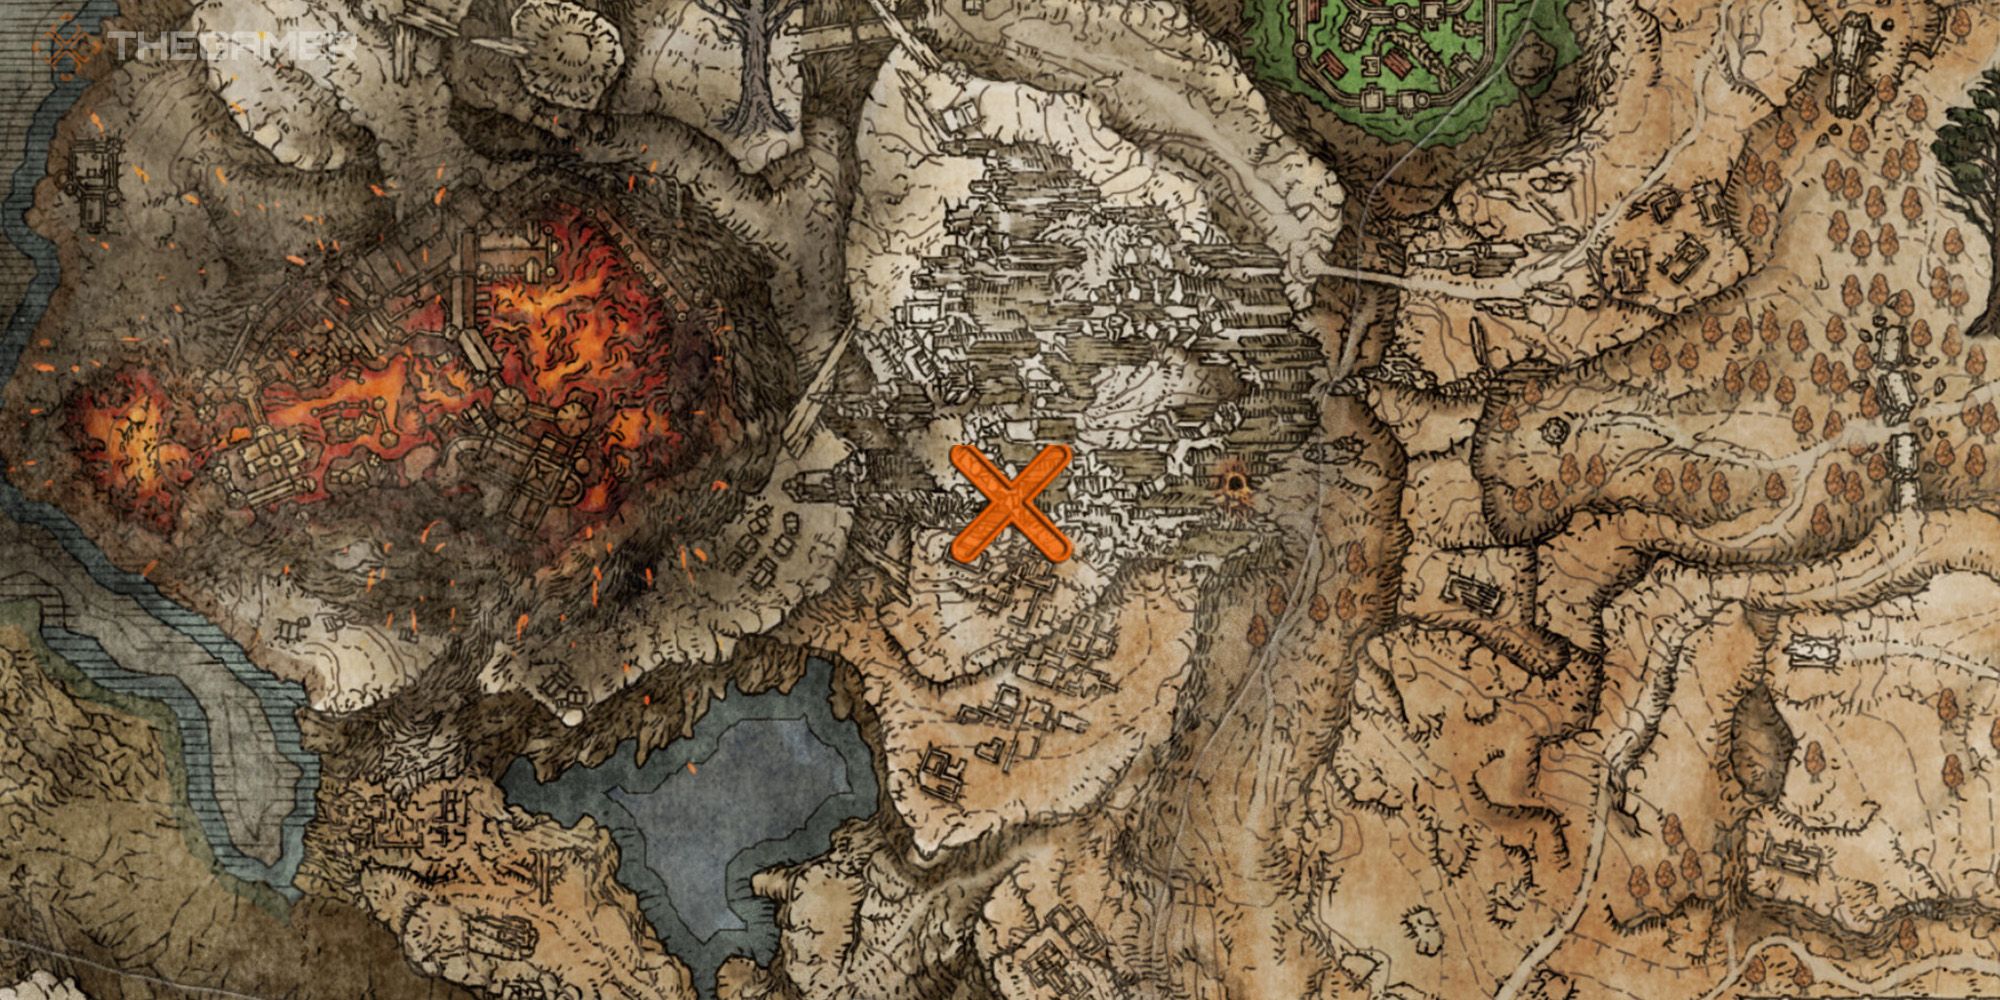 Elden Ring Map showing the location of Ancient Dragon Apostle's Cookbook [1]